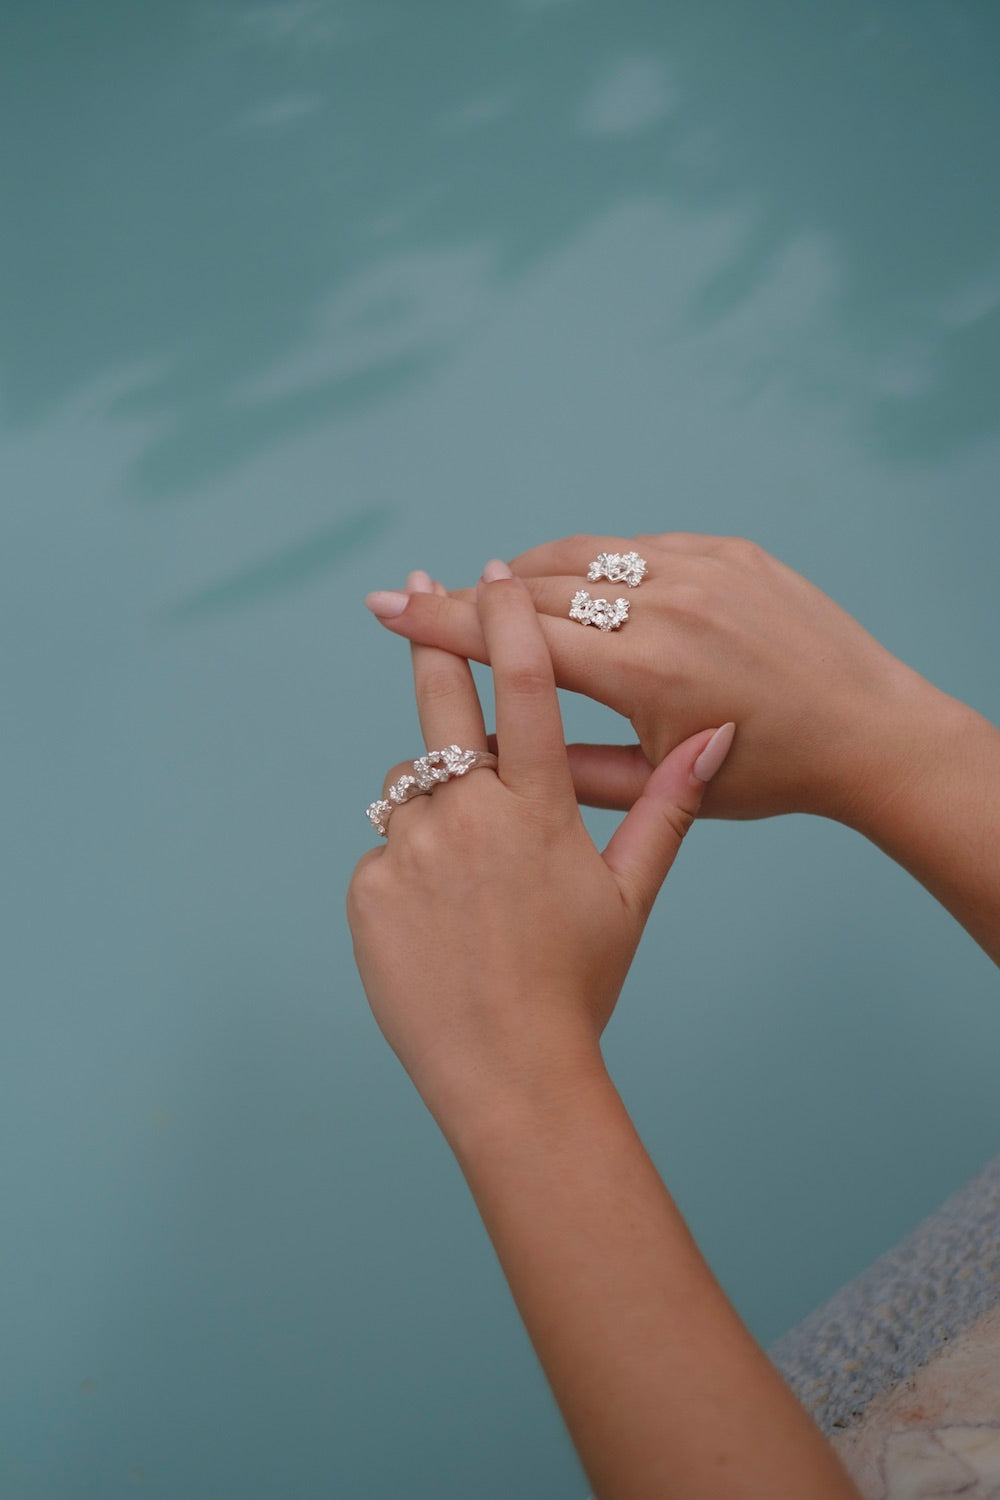 A woman's handcrafted hands adorned with a Cremilde Bispo Jewellery floral foliage jewelry collection, gently cradling The Glade ring by a pool.